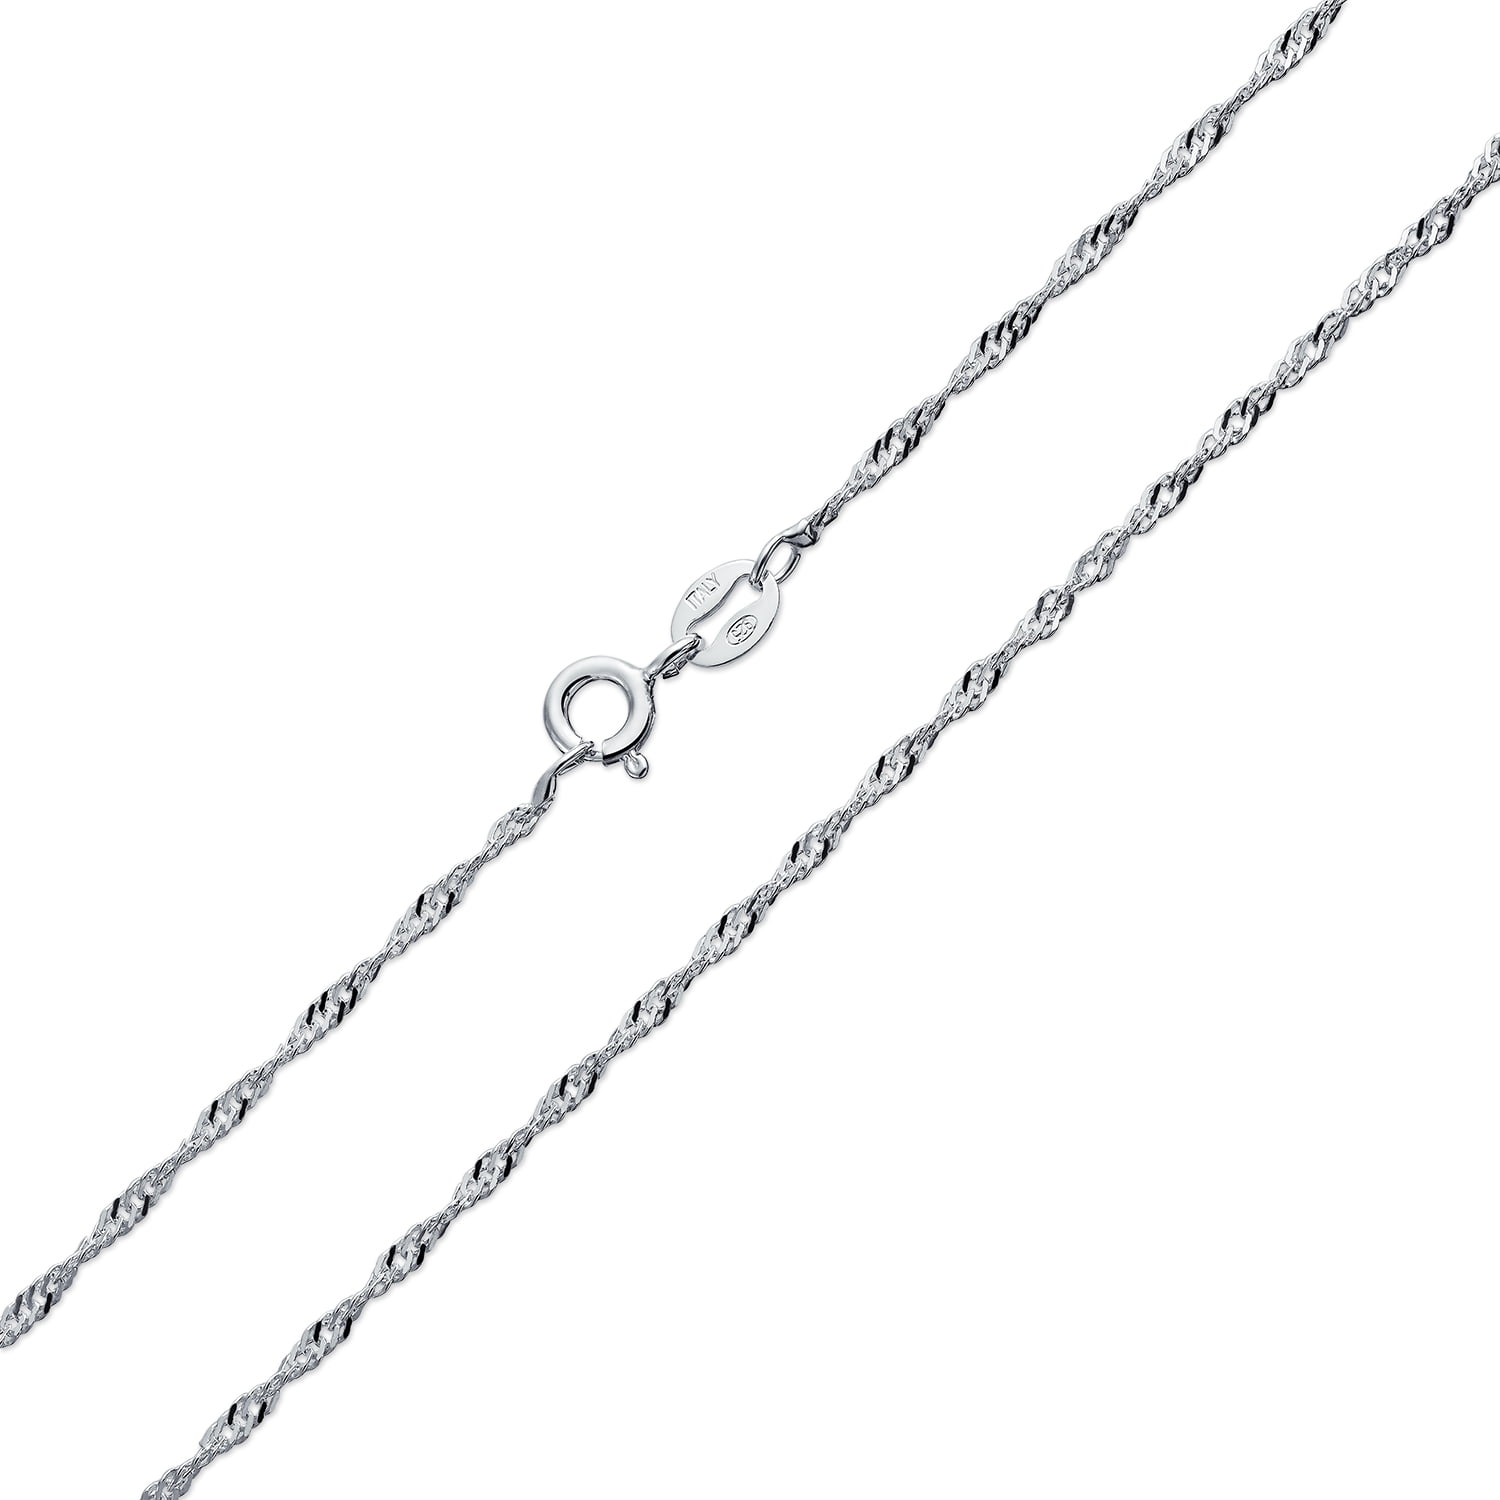 18 20 22 24 925 Sterling Silver Rhodium-plated Lobster Claw Closure Rhodium Plated 2.75mm Sparkle-Cut Rope Chain Necklace Length Options 